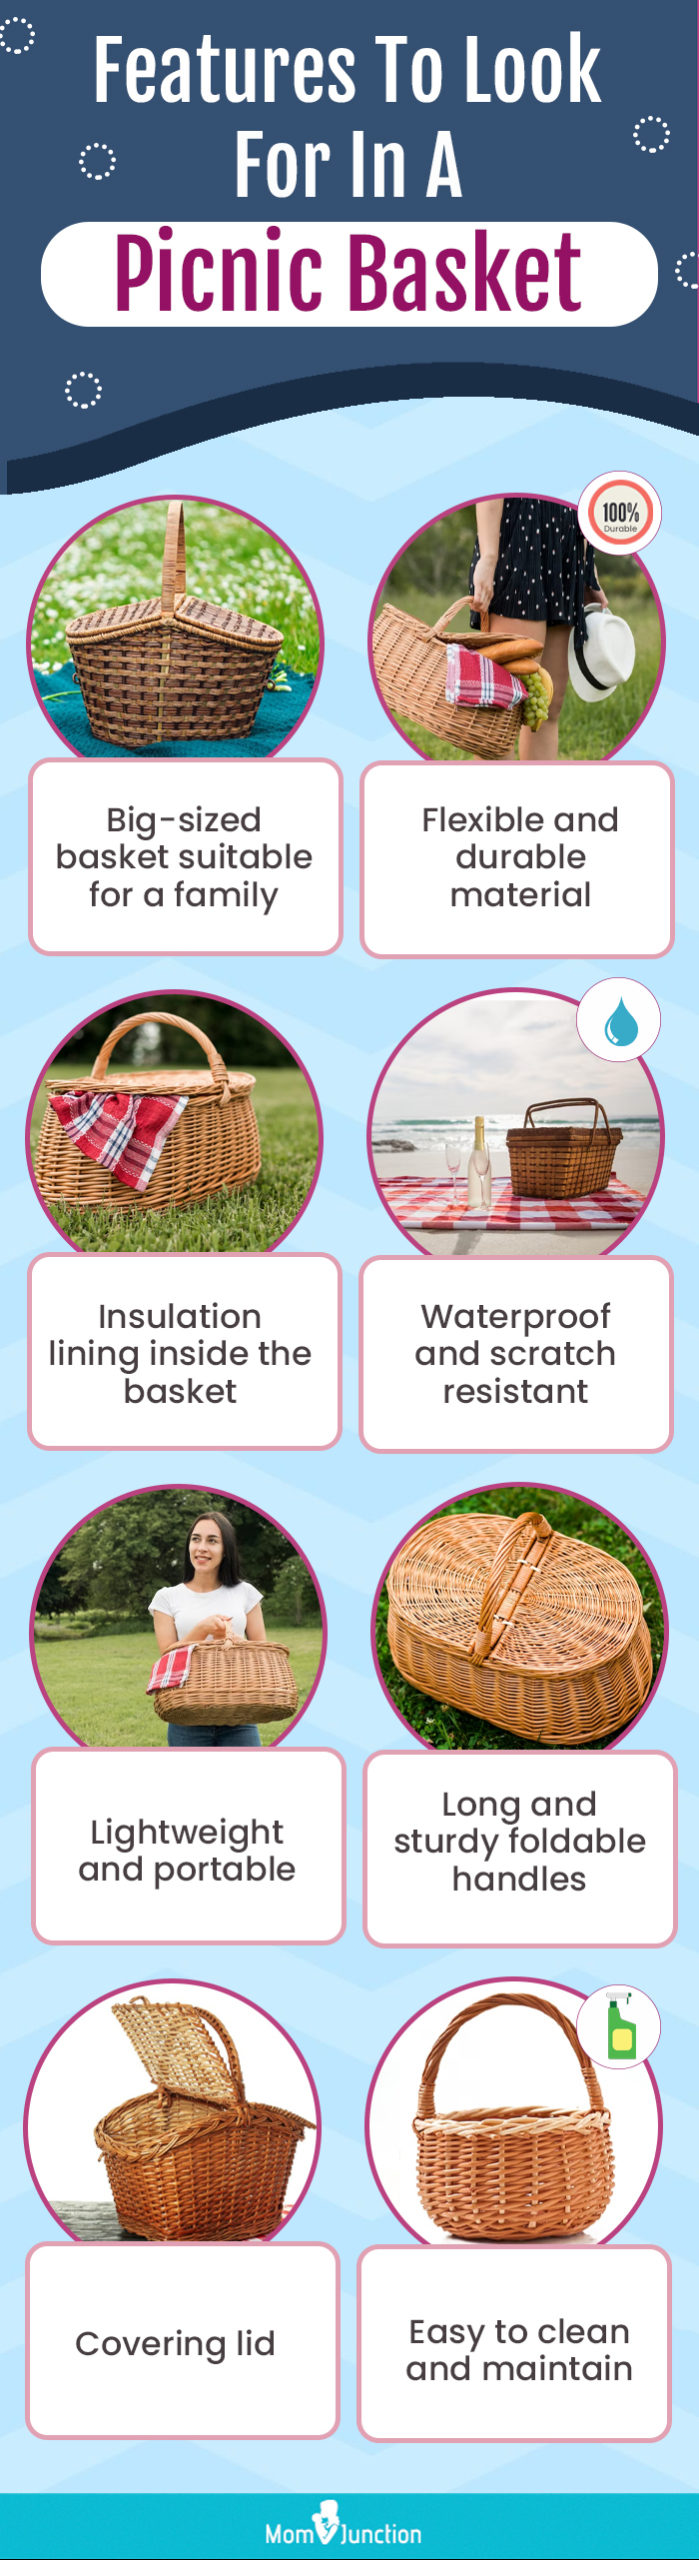 Features To Look For In A Picnic Basket (infographic)